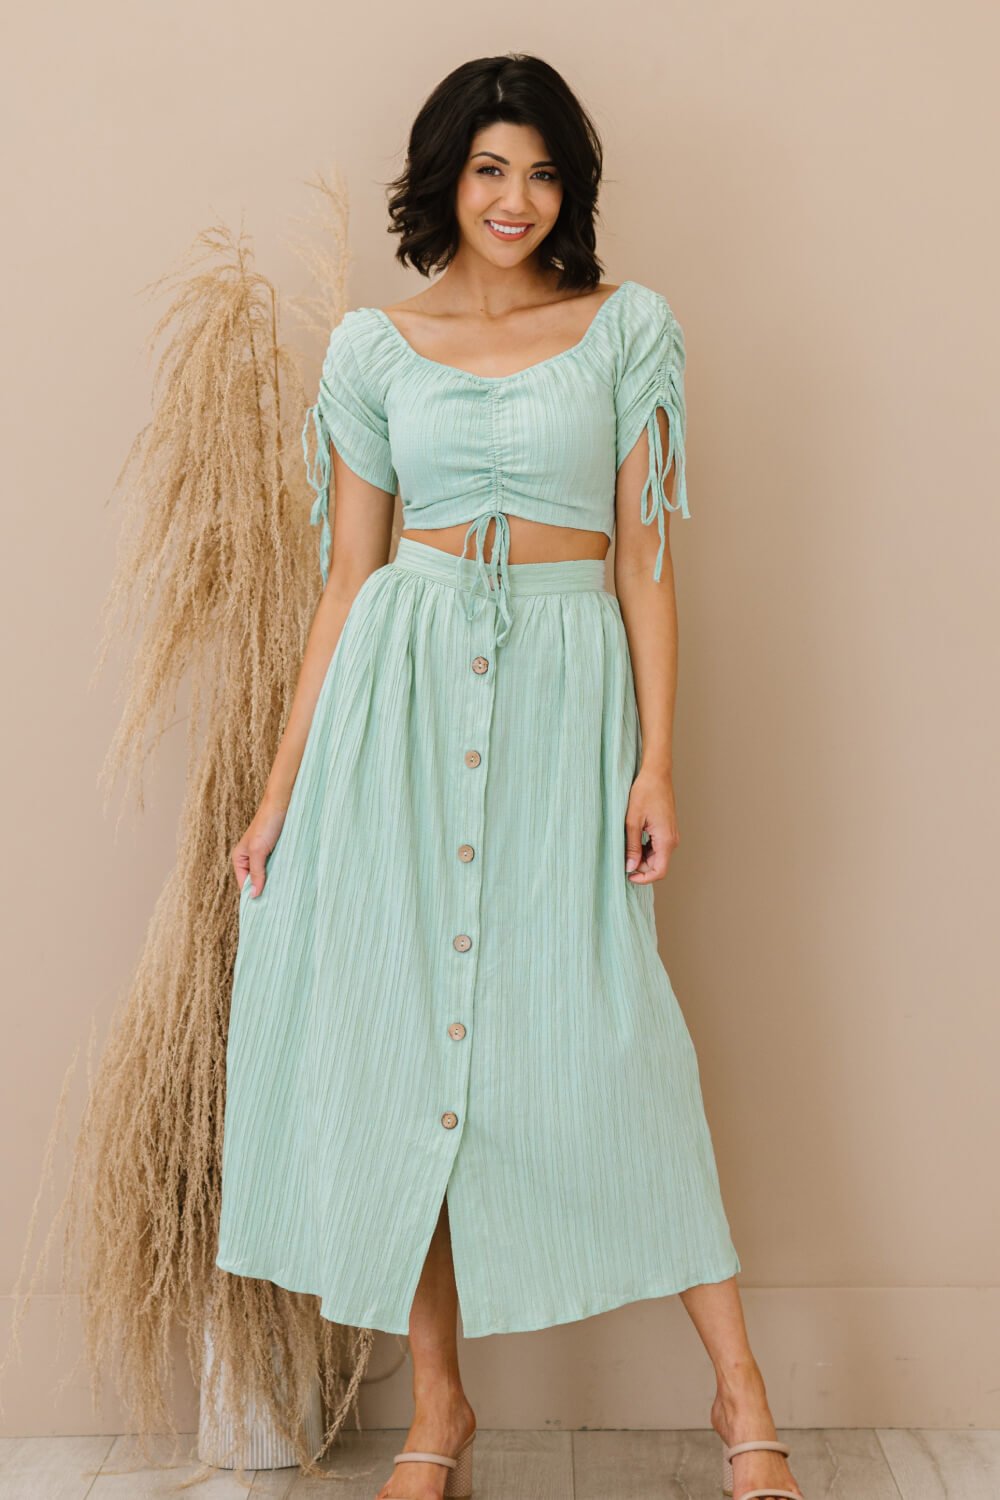 Look at Me Crop Top and Midi Skirt Set - Bakers Shoes store